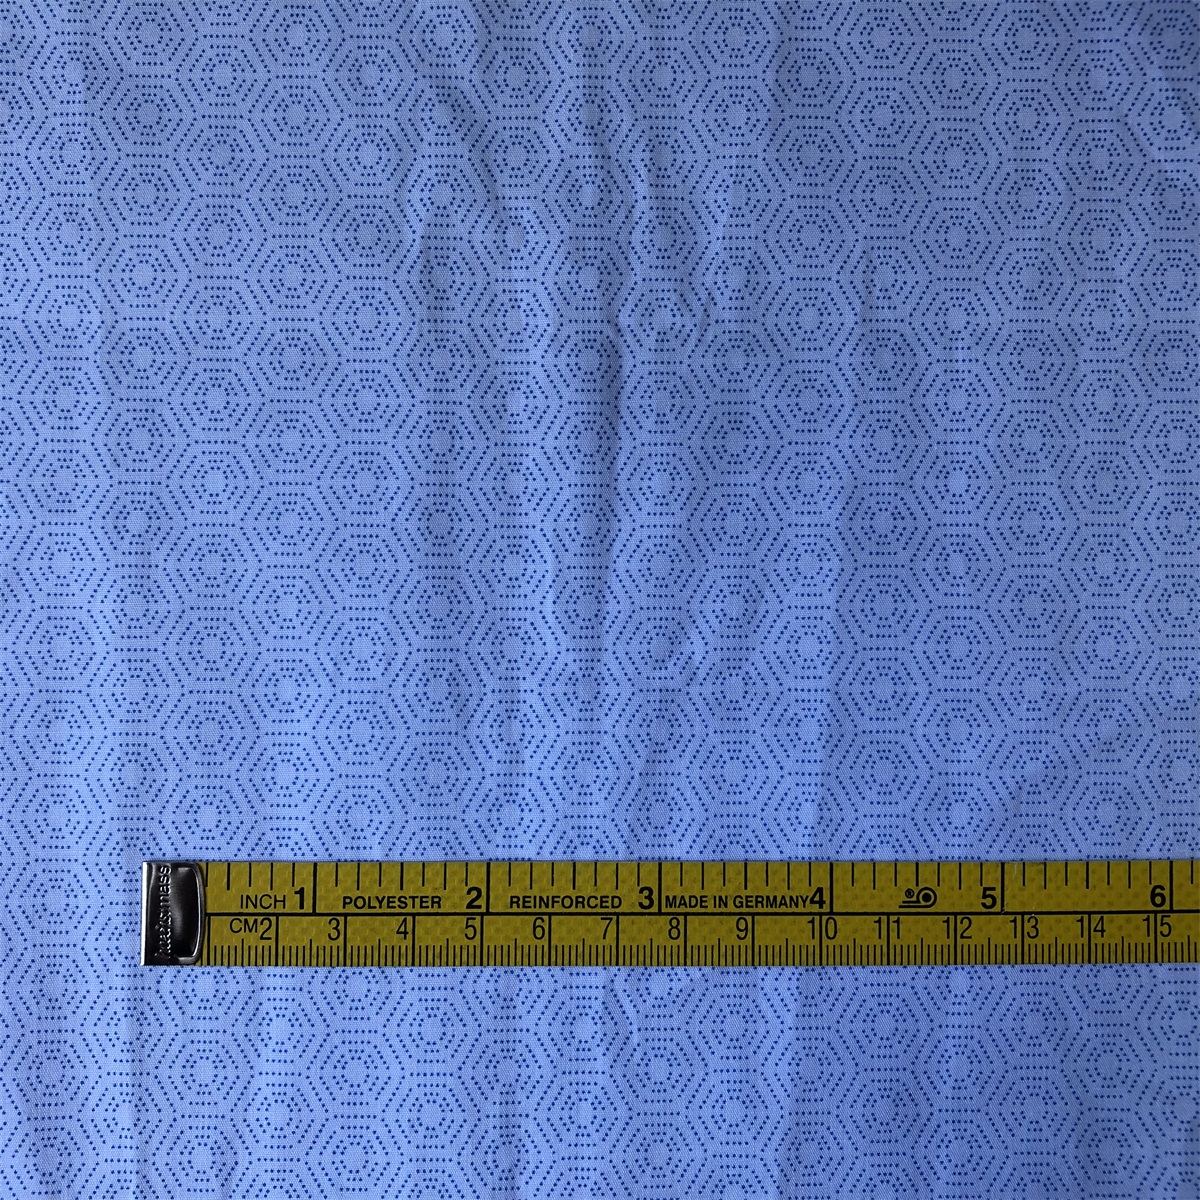 Sun-rising Textile Cotton fabric for men's casual shirts 100% cotton poplin printed shirts woven fabric soft touch